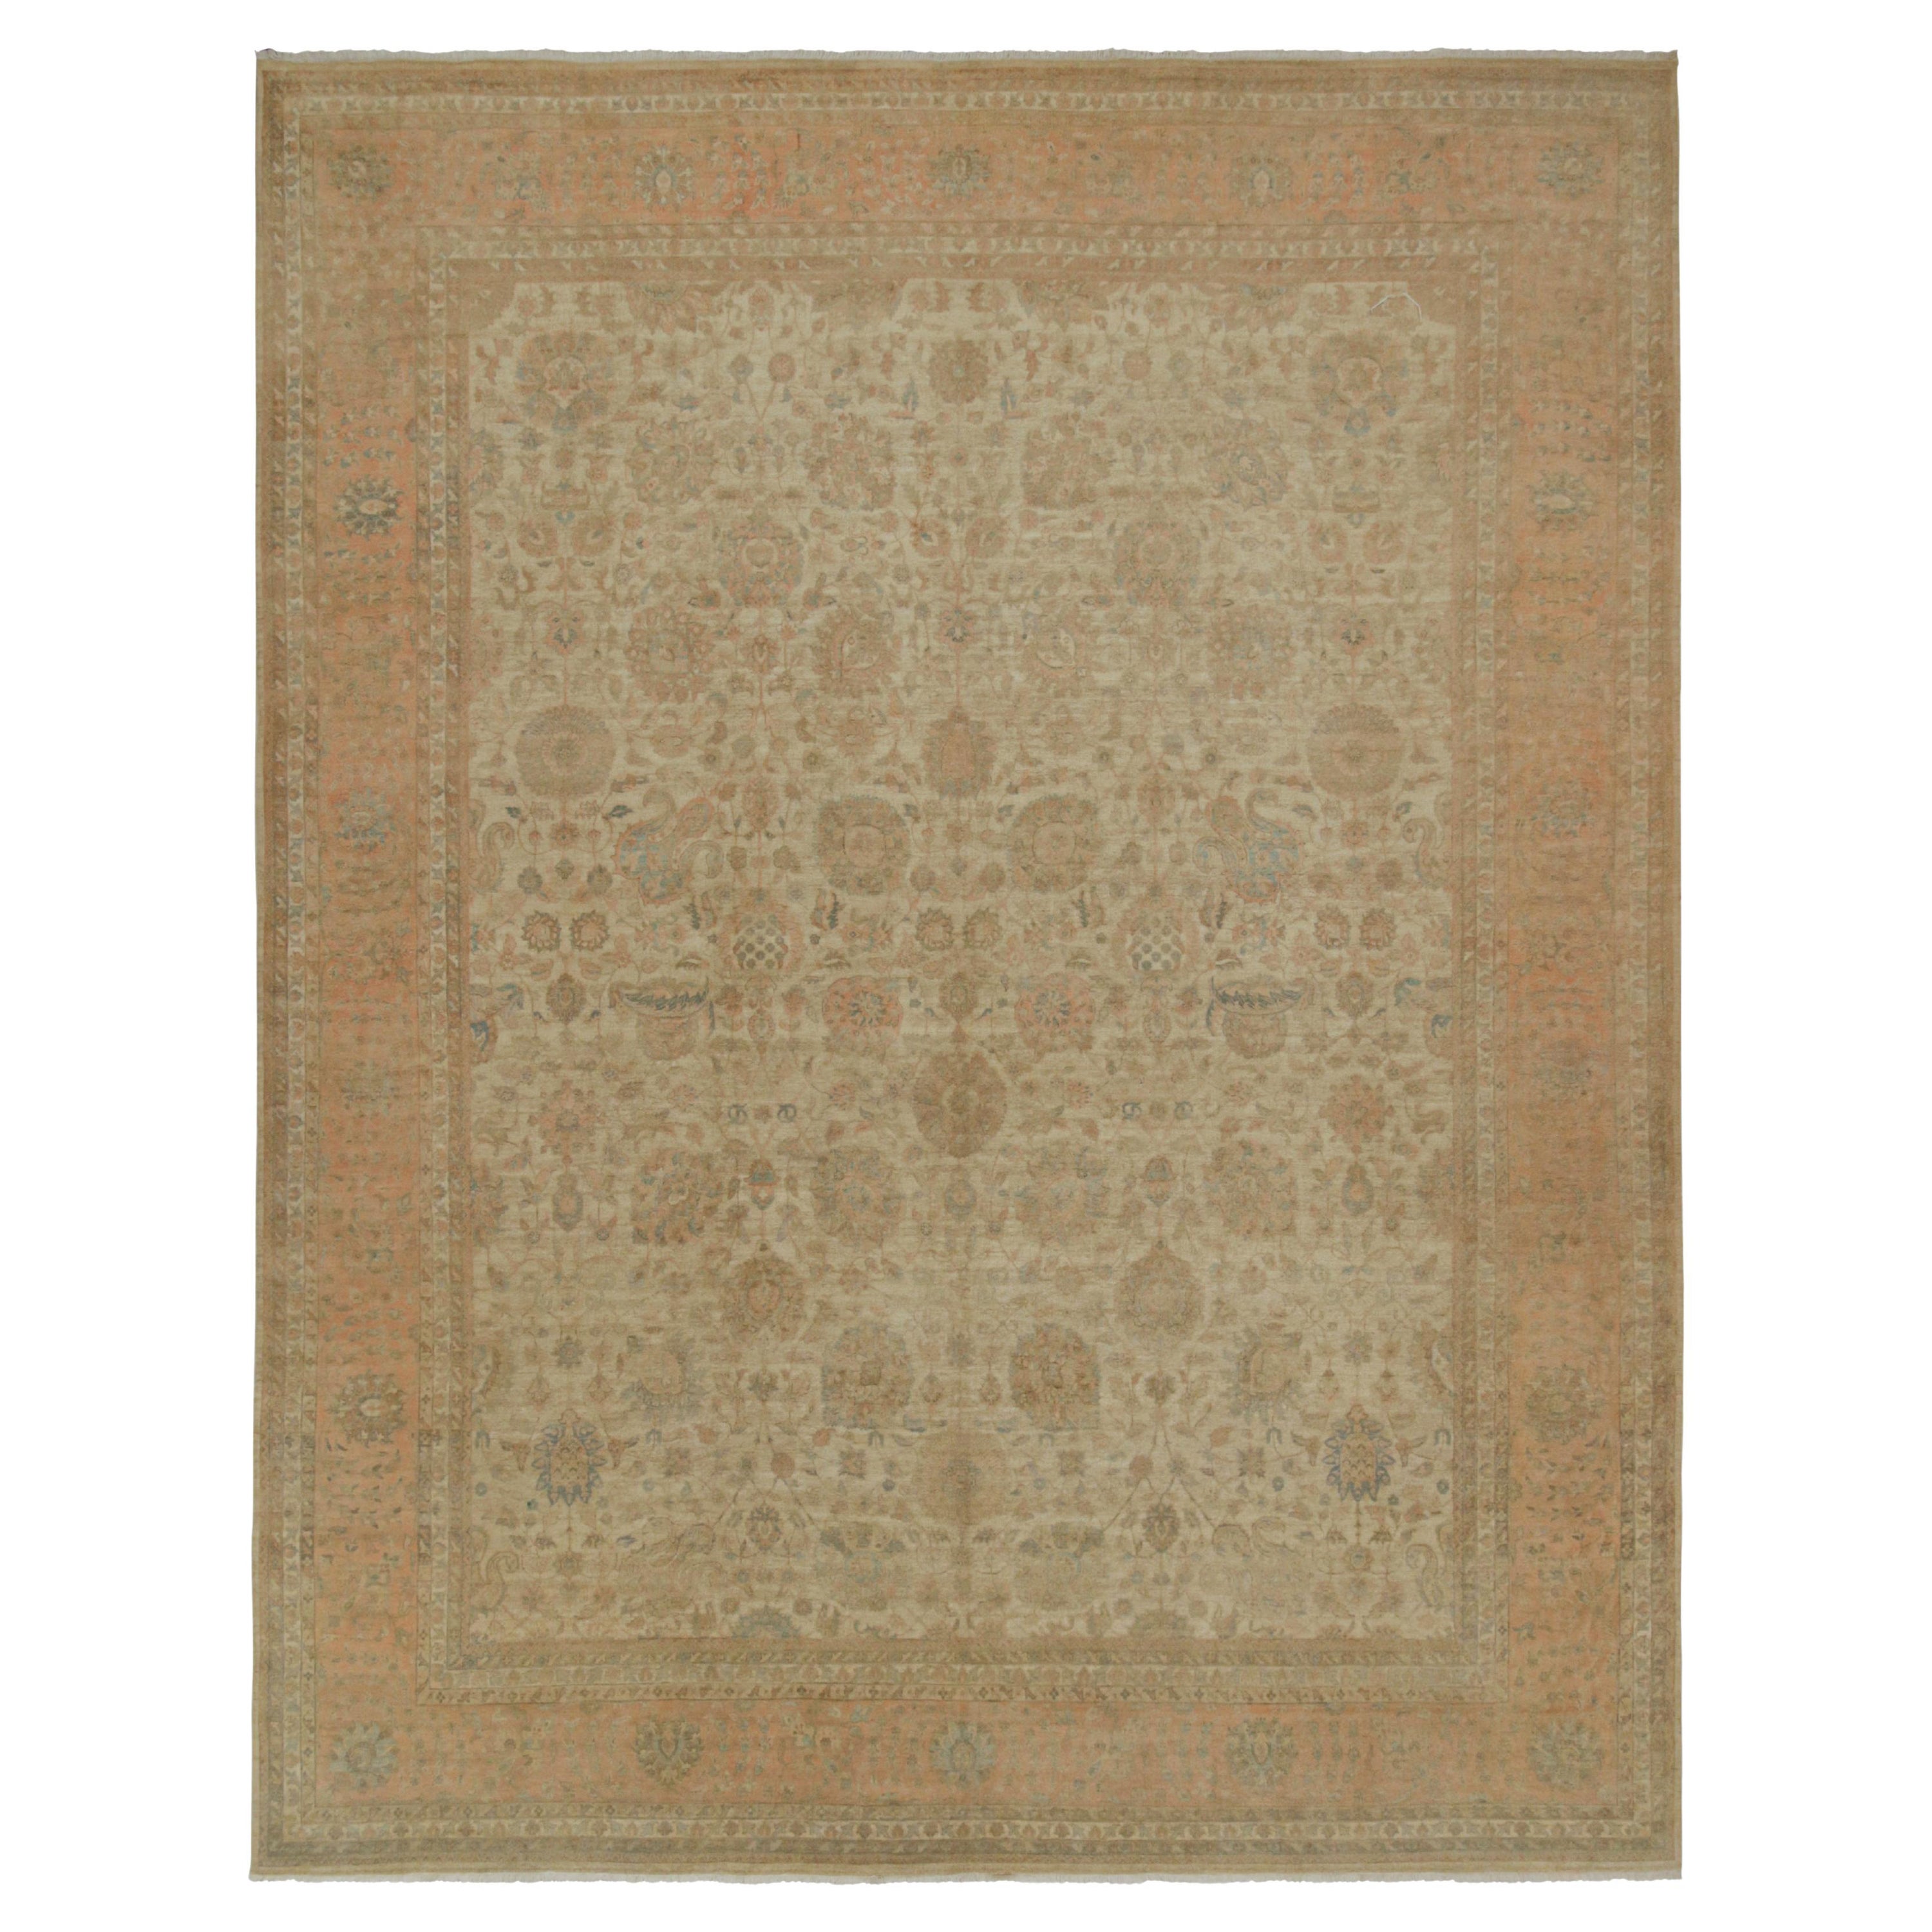 Rug & Kilim’s Classic Persian Style Rug in Beige-Brown with Pink Floral Patterns For Sale